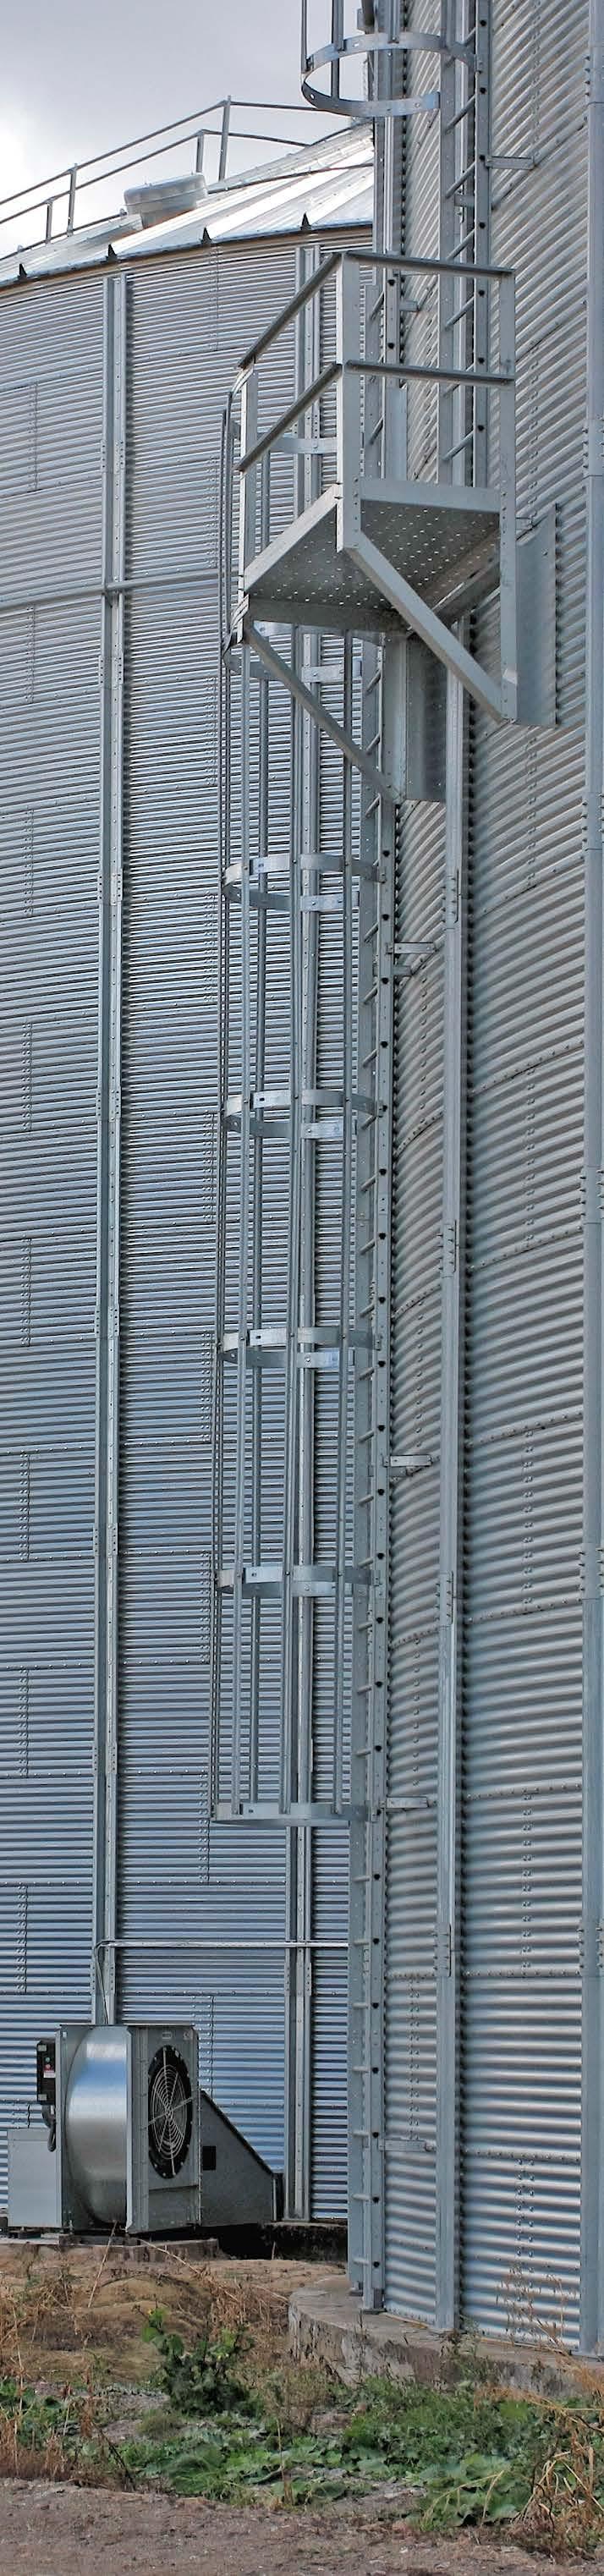 Farm Bins (Non-Stiffened and Stiffened) Farm Bins (Non-Stiffened and Stiffened) up to 5 rings are designed to provide general drying and grain storage.